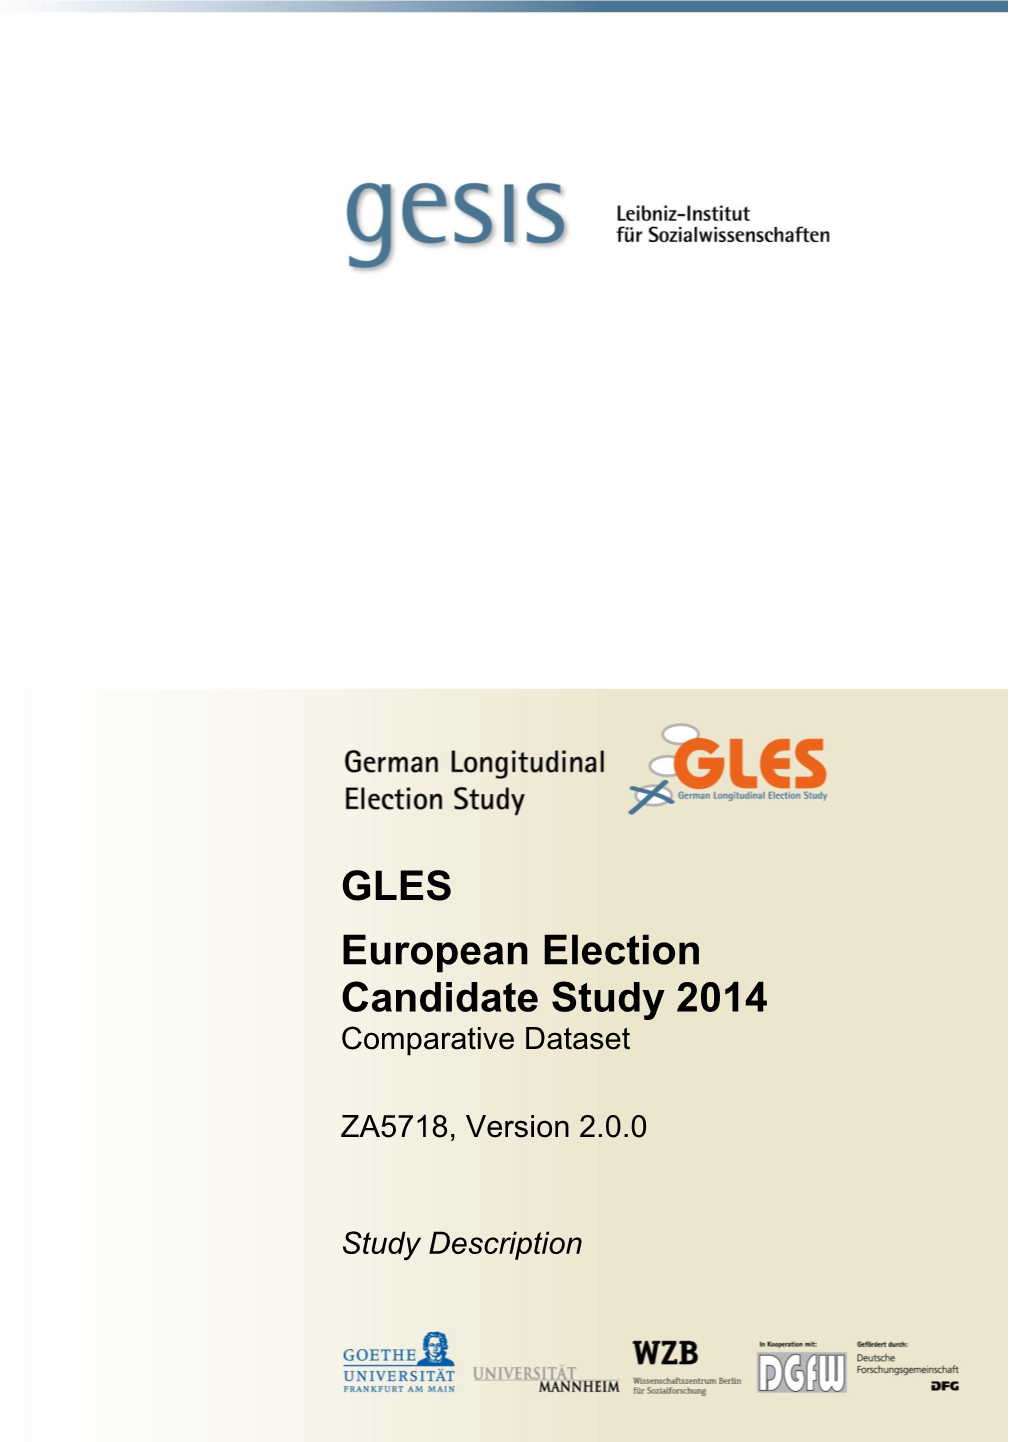 GLES European Election Candidate Study 2014 Comparative Dataset